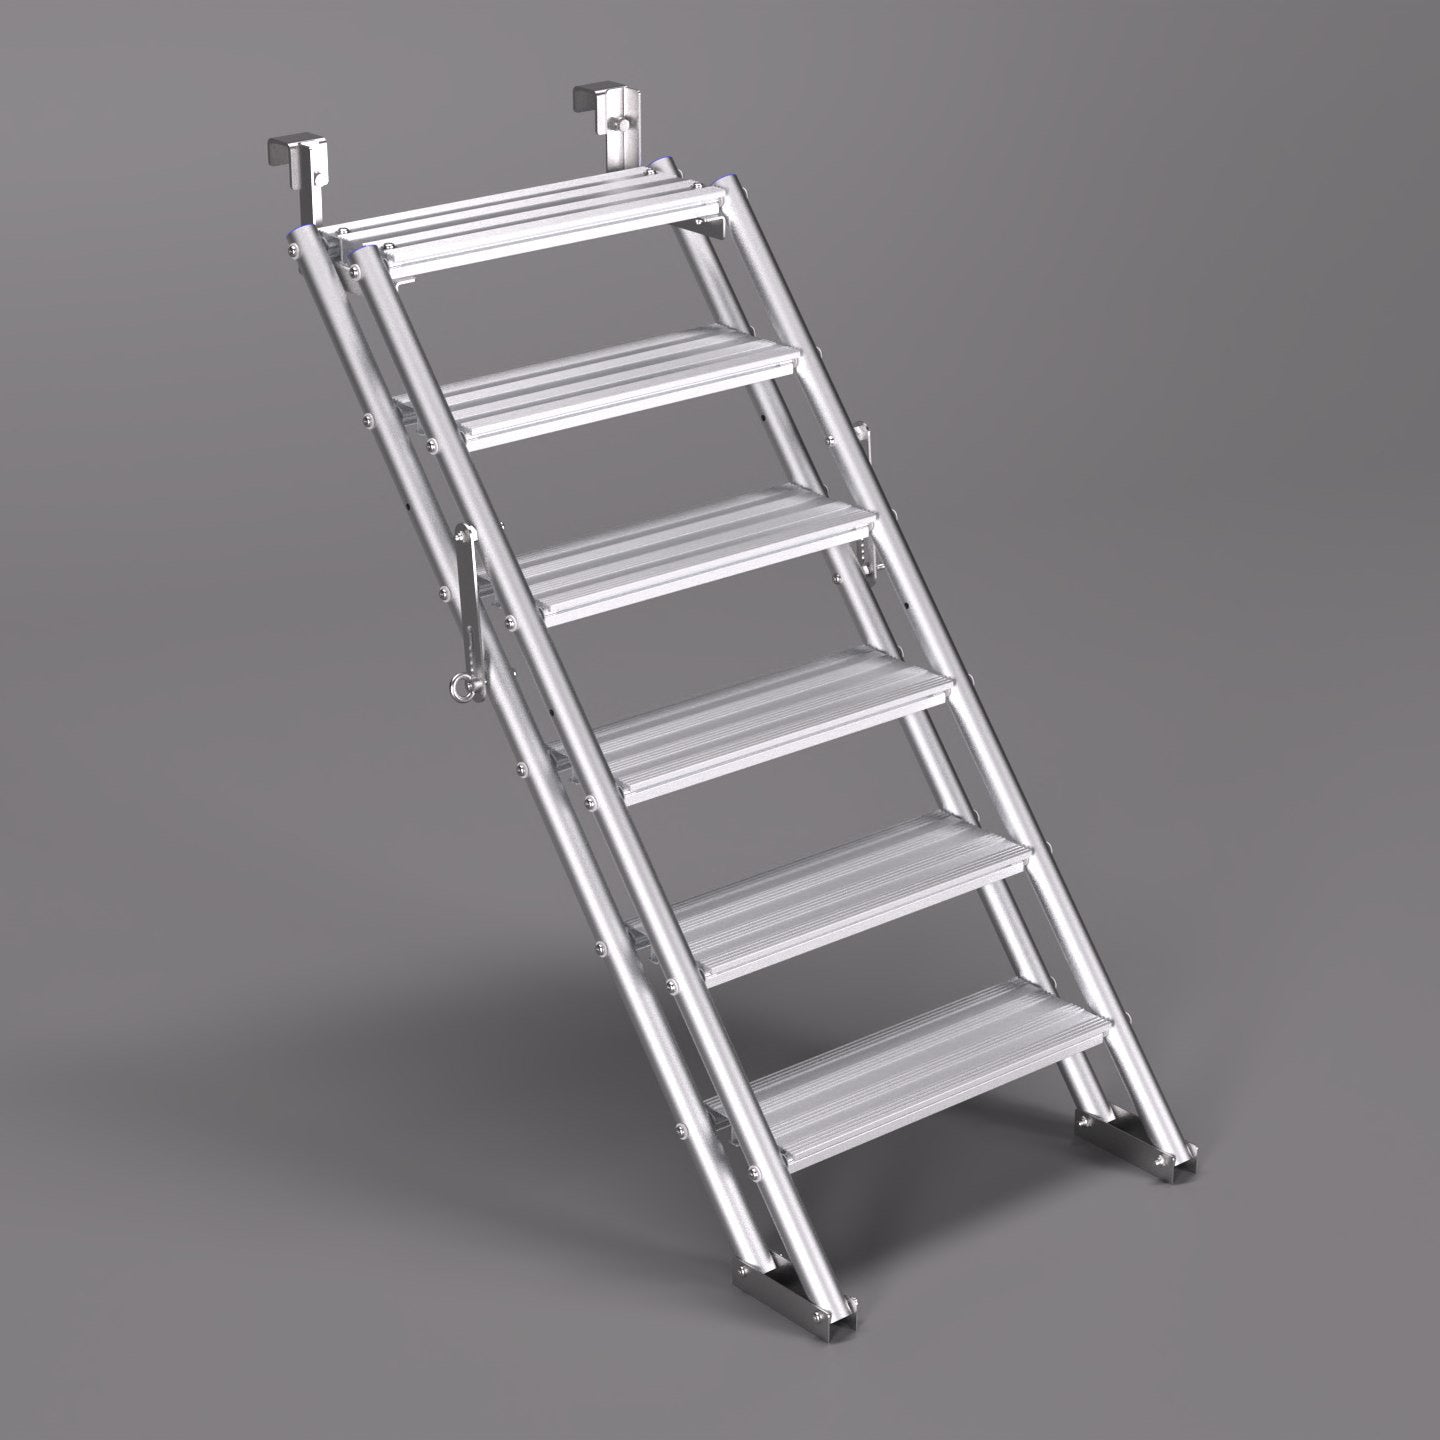 An image of a 1.5m ALTO Universal Stair Unit with the scaffold tube hook option.